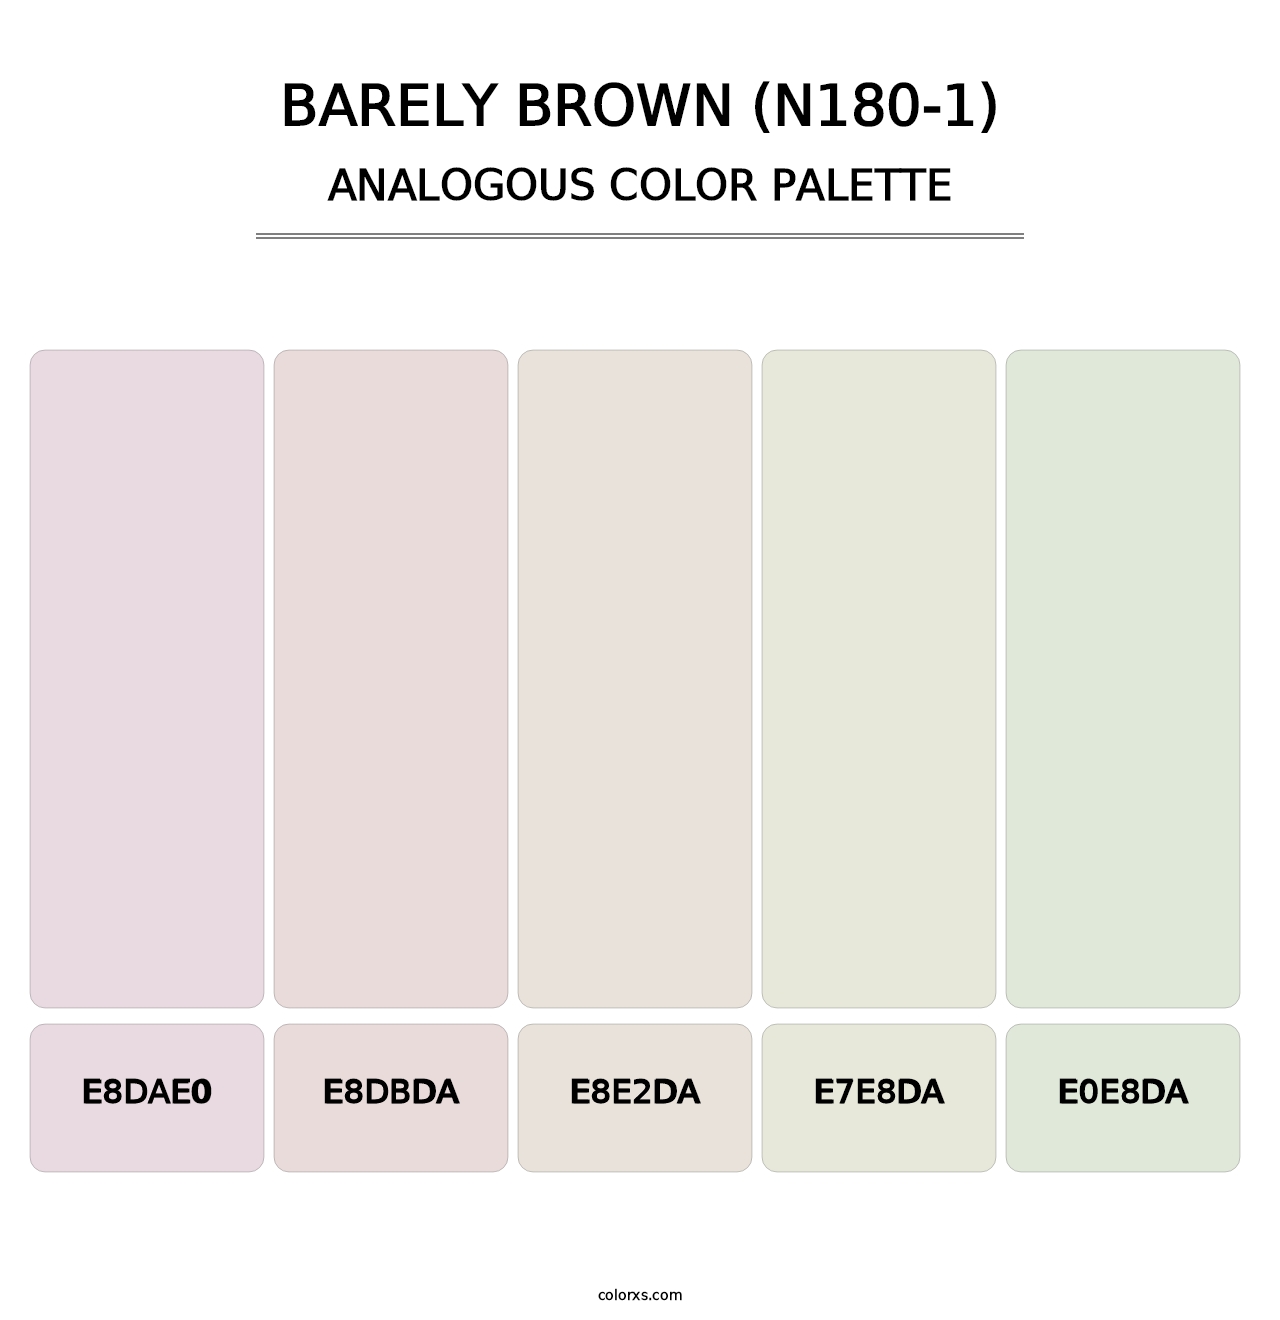 Barely Brown (N180-1) - Analogous Color Palette